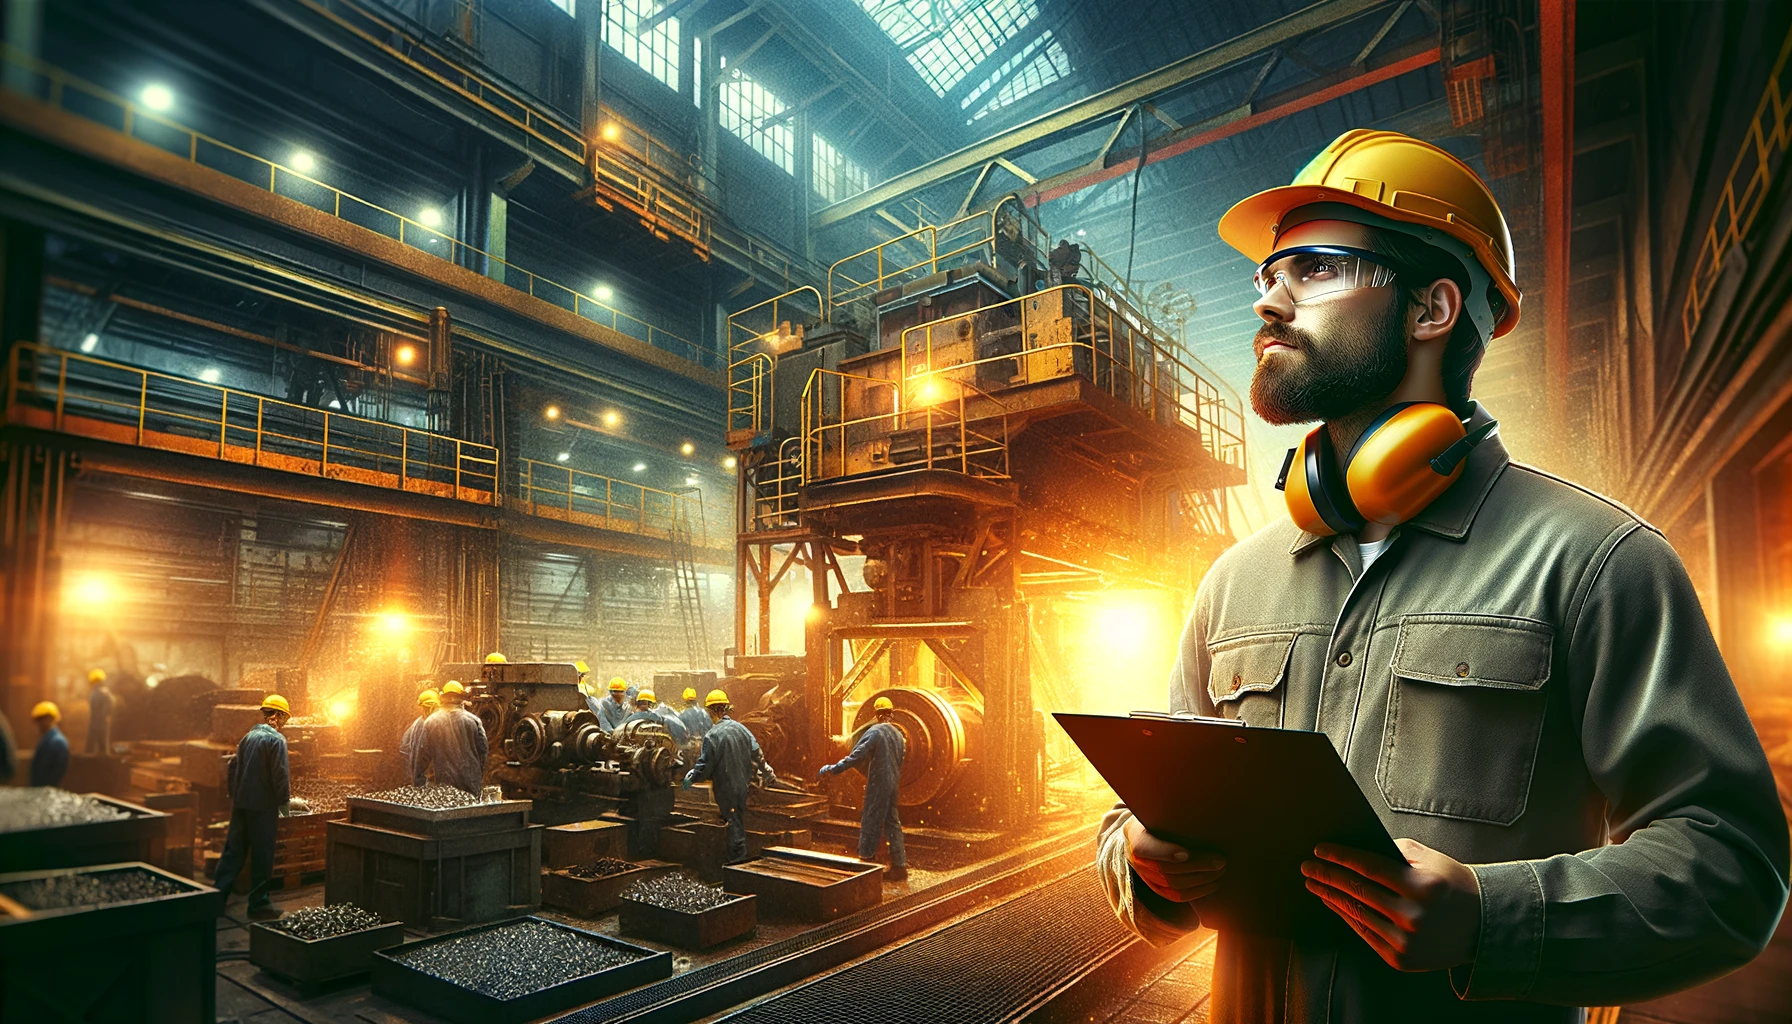 The illustration features a human engineer in a metallurgical factory, attentively observing the machinery. He's equipped with a yellow hard hat, protective glasses, and ear protection, holding a clipboard. The factory setting is vividly depicted with various metalworking processes, enhanced by a blend of warm and cold lighting to create a harmonious and realistic atmosphere.